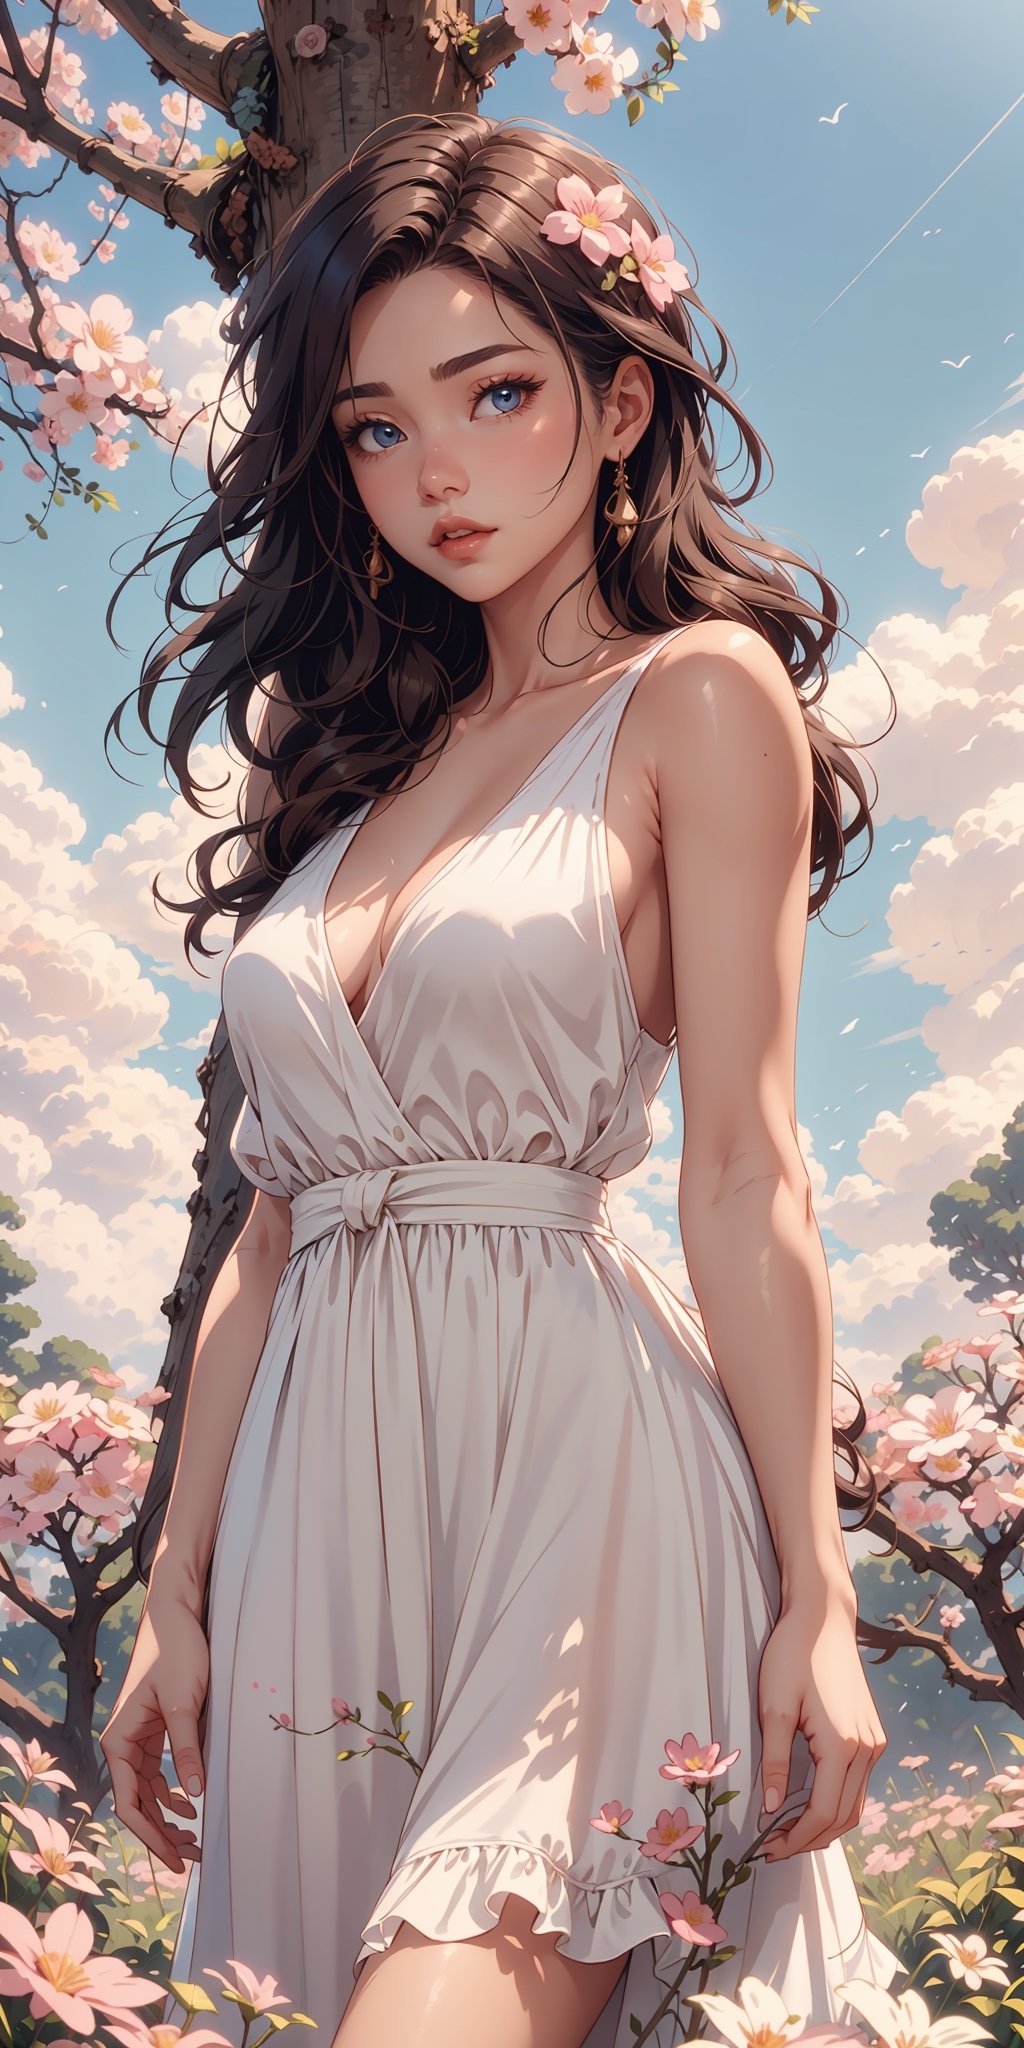 a woman in a white dress standing in front of a tree with pink flowers on it and a blue sky,Chizuko Yoshida,rossdraws global illumination,a detailed, ,Sexy Women ,More Detail